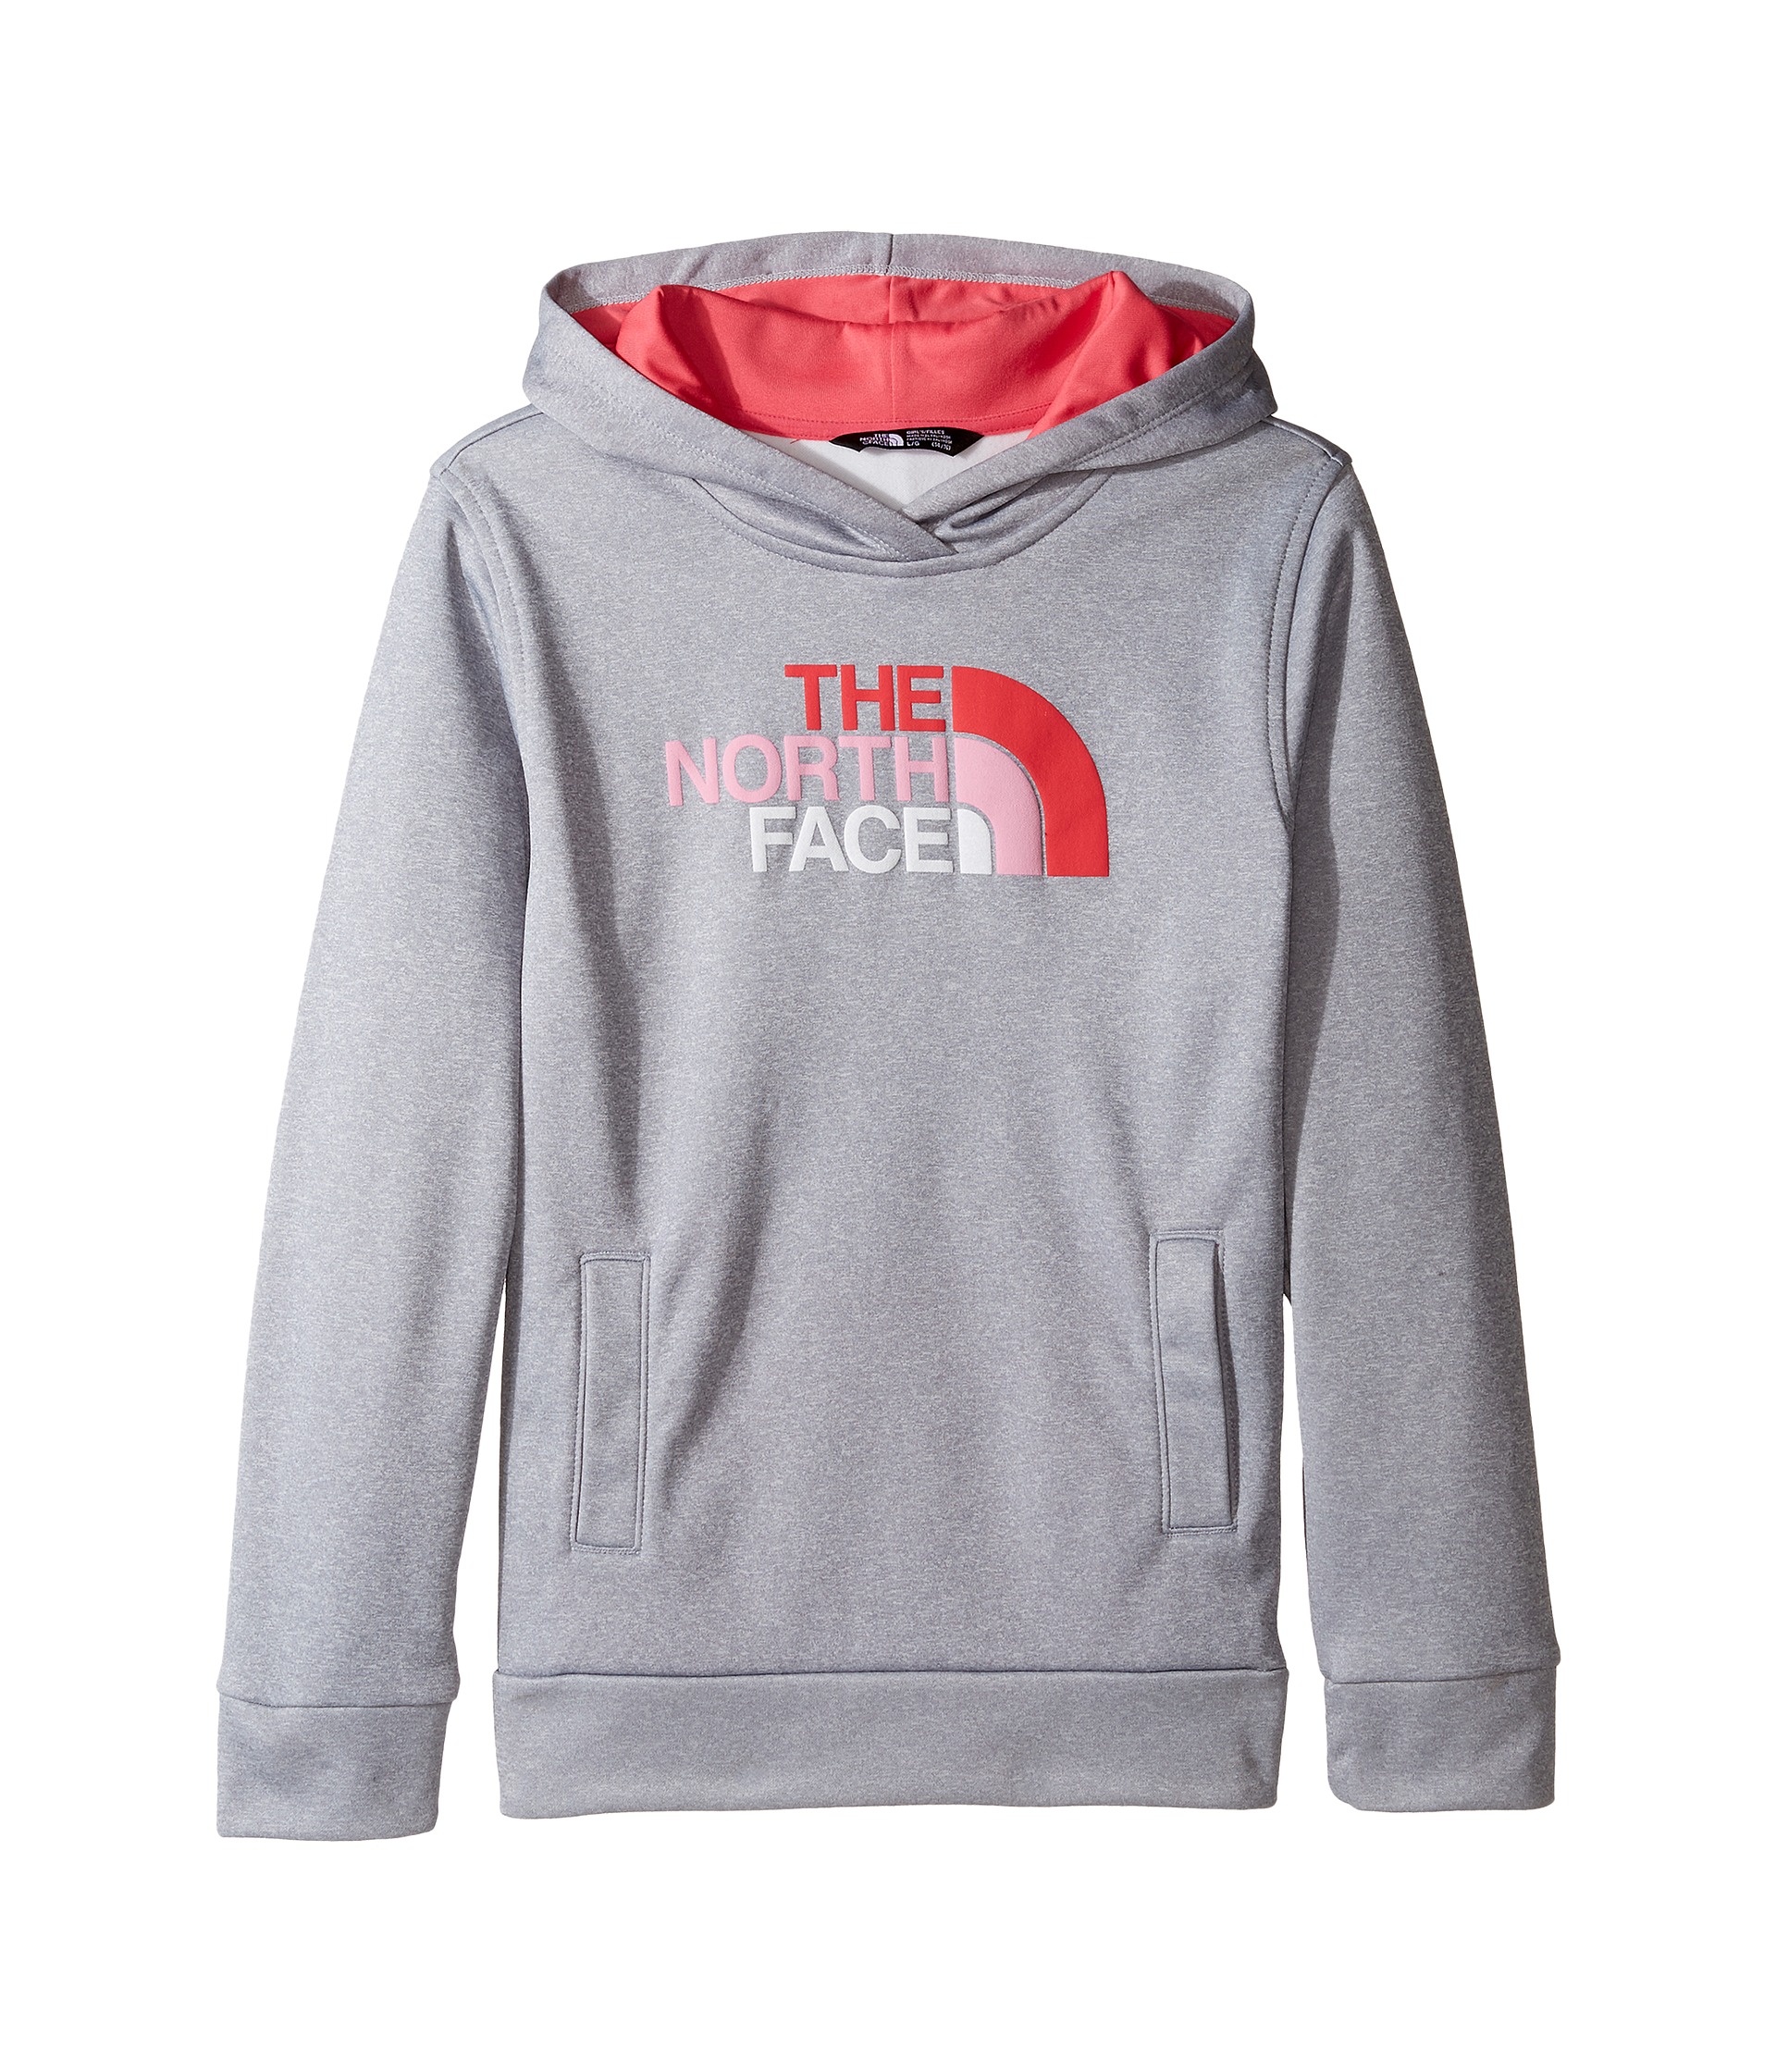 The North Face Kids Surgent Pullover Hoodie (Little Kids/Big Kids) at